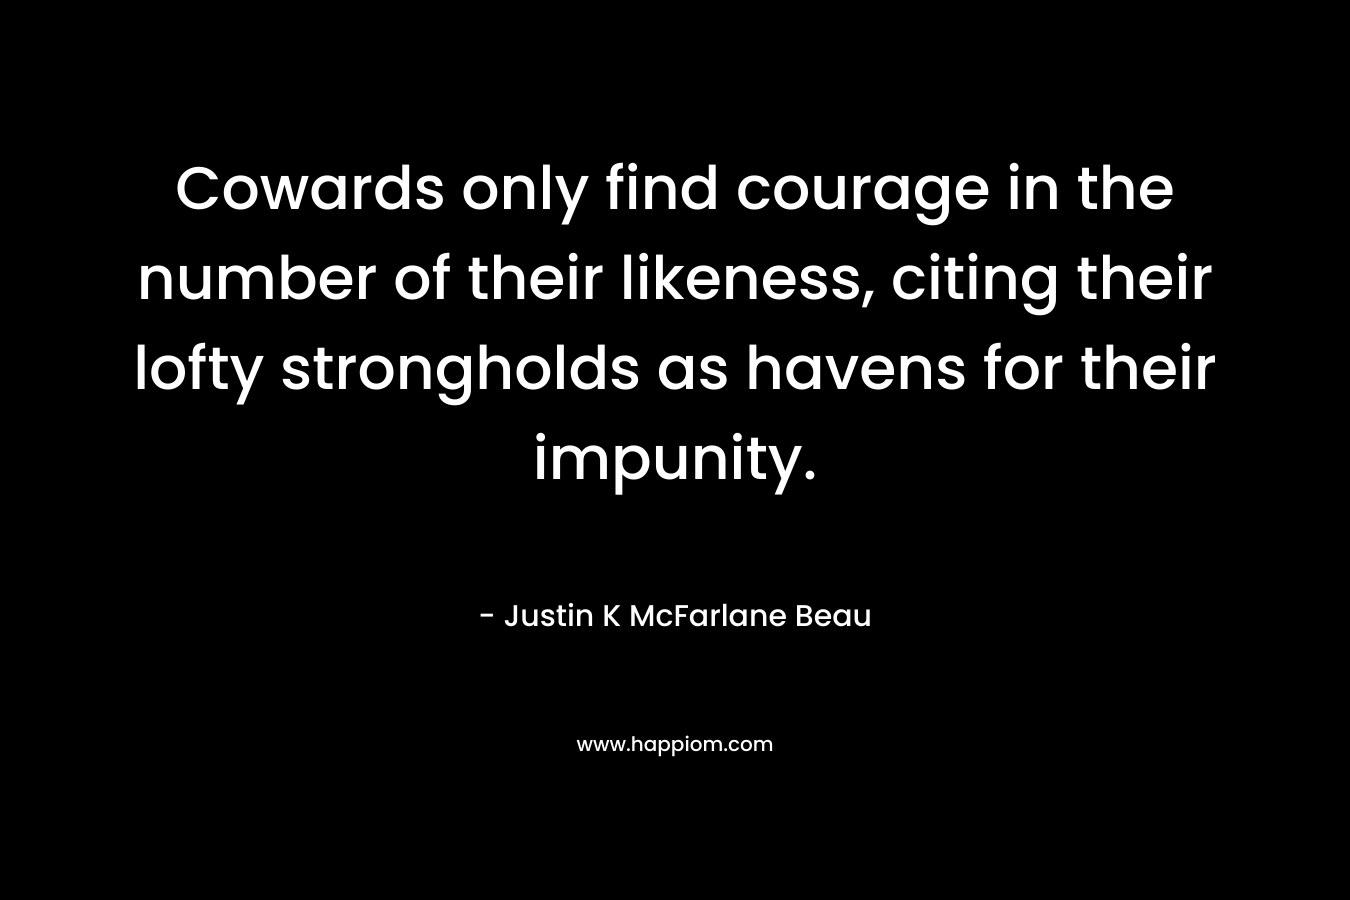 Cowards only find courage in the number of their likeness, citing their lofty strongholds as havens for their impunity.